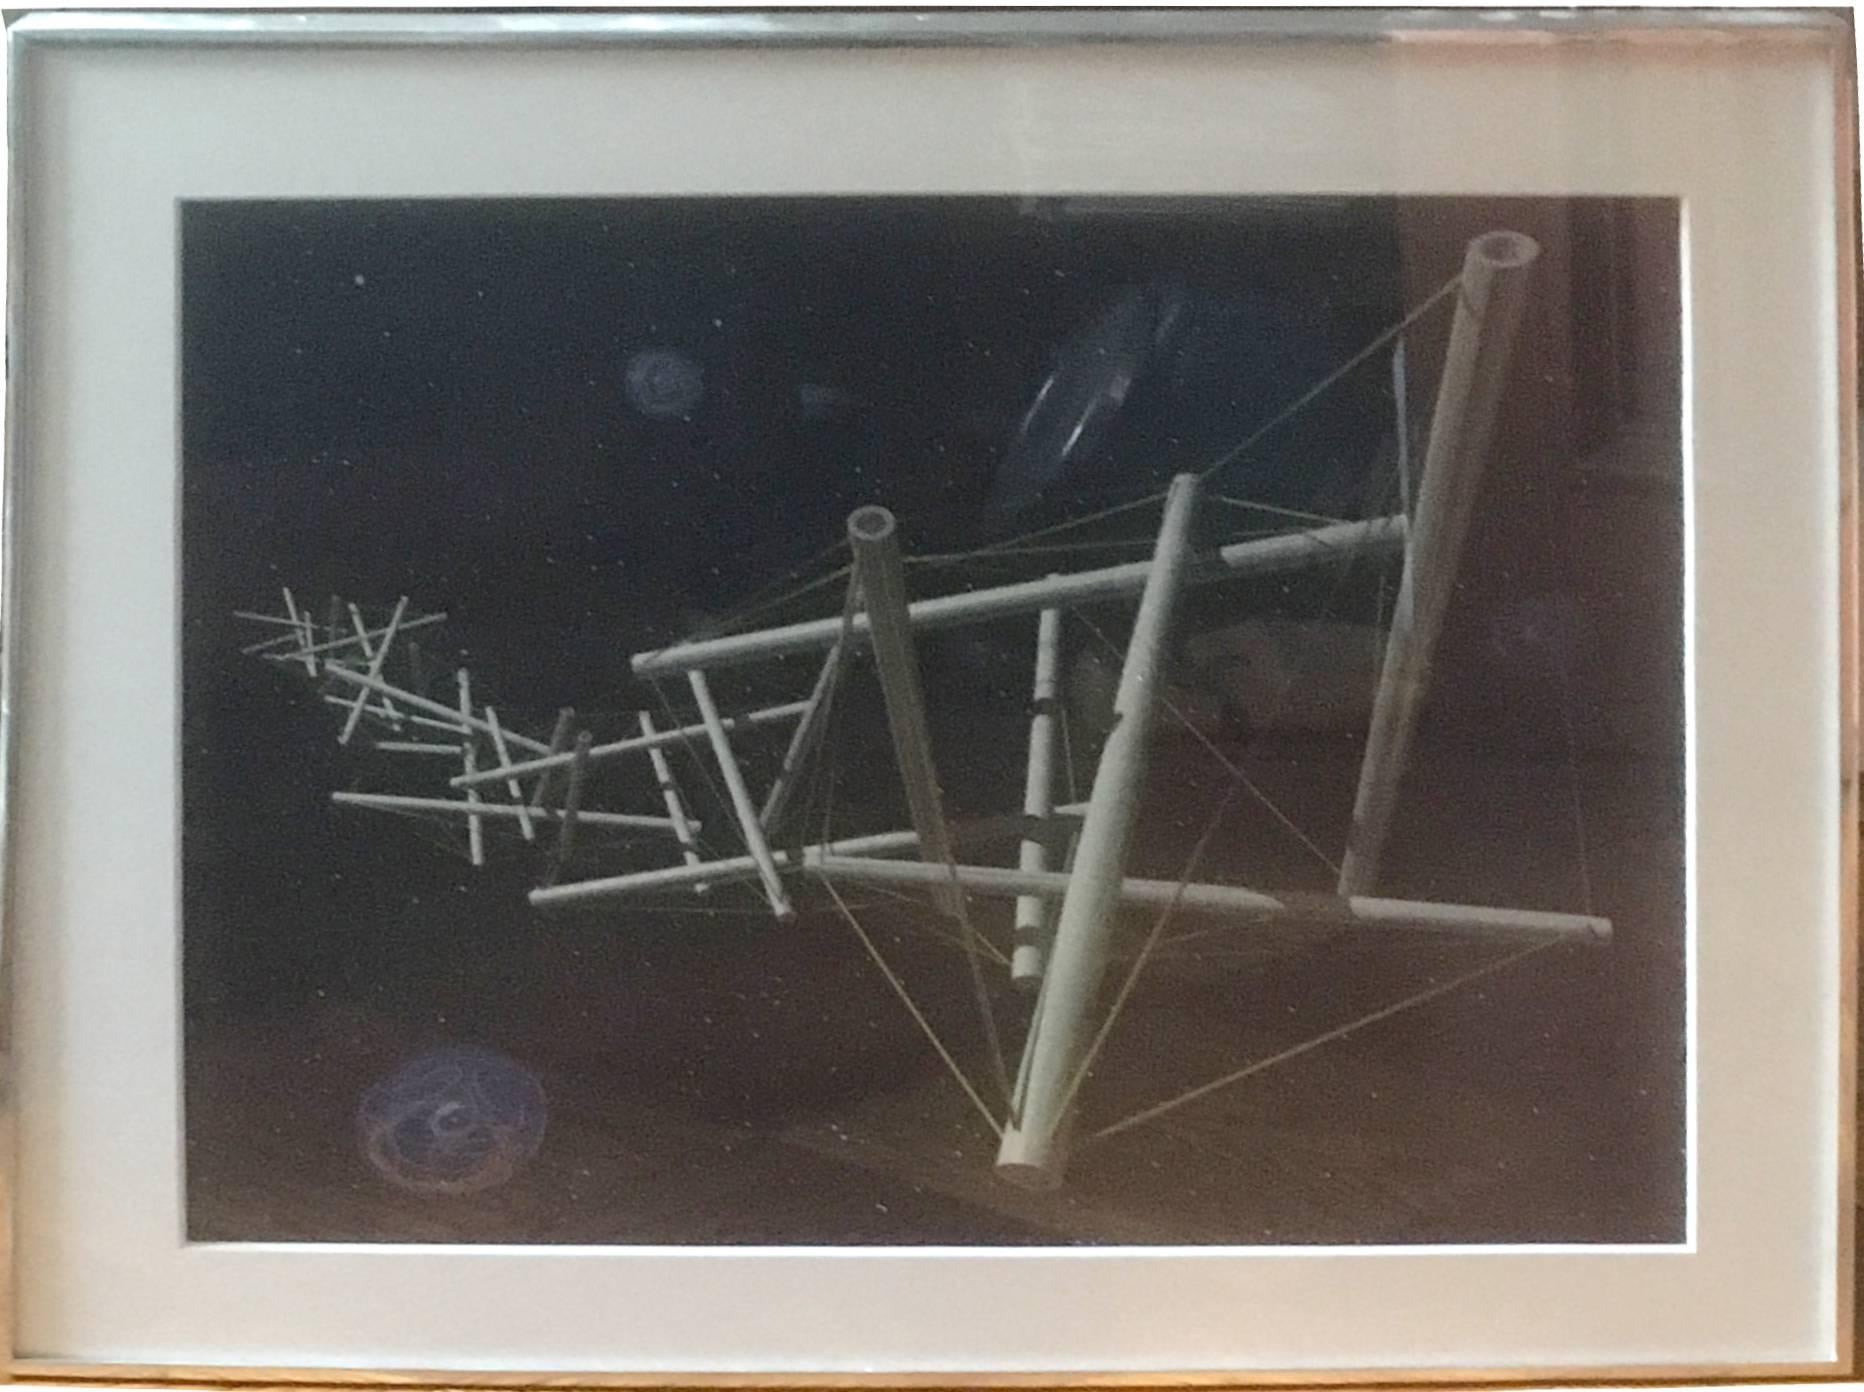 Kenneth Snelson Night Landing 1991-1998 Framed Iris Print

American Kenneth Snelson (1927- 2016) is an artist working in three dimensions with elements that emphasize geometric forms slicing through air. His concrete forms connected by steel wire